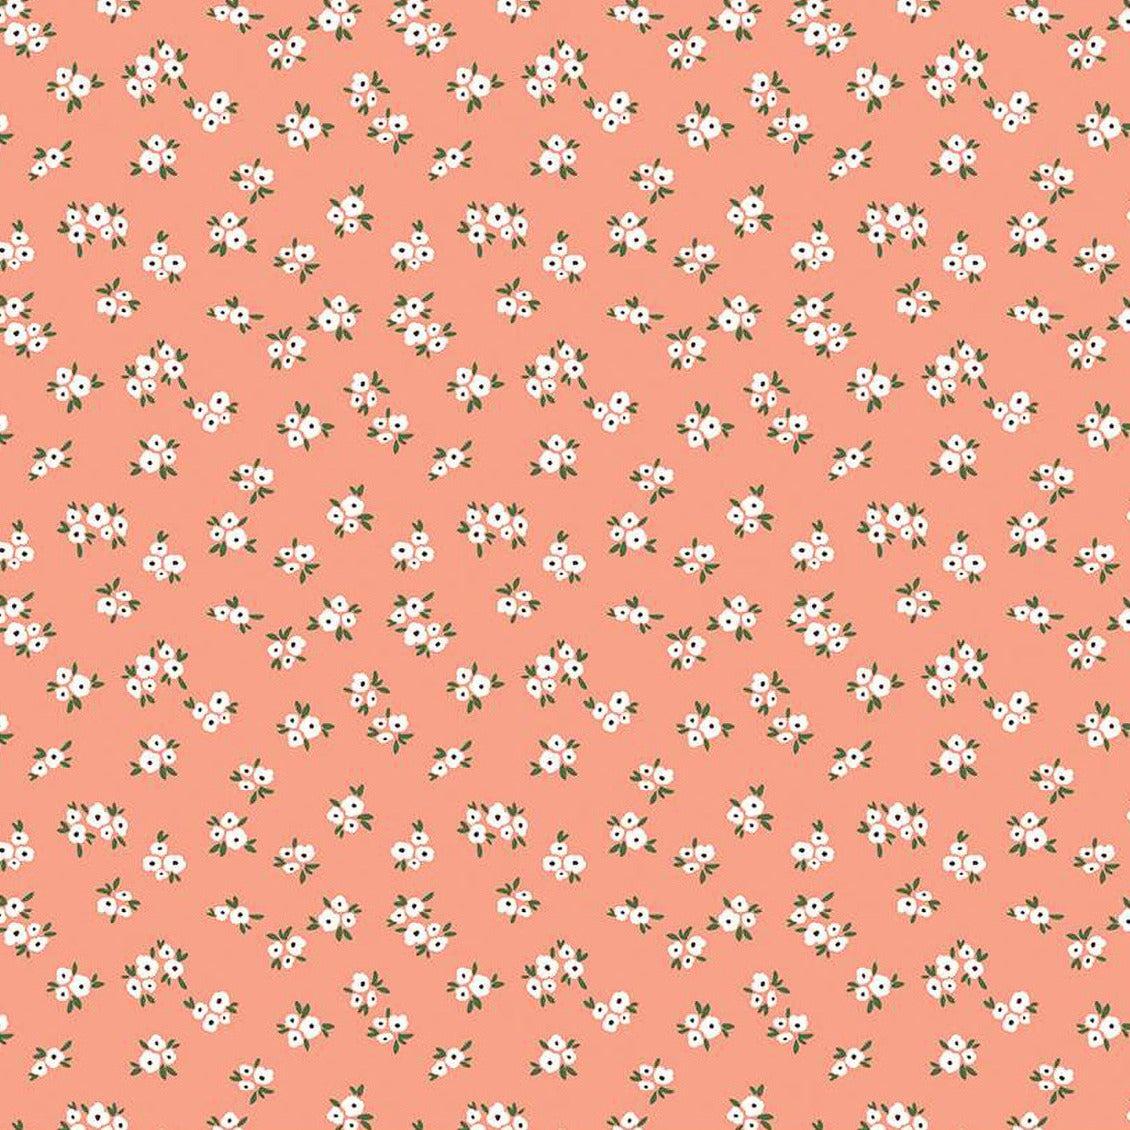 Homemade Coral Blossoms Fabric by Echo Park Paper Co. - Riley Blake Fabrics